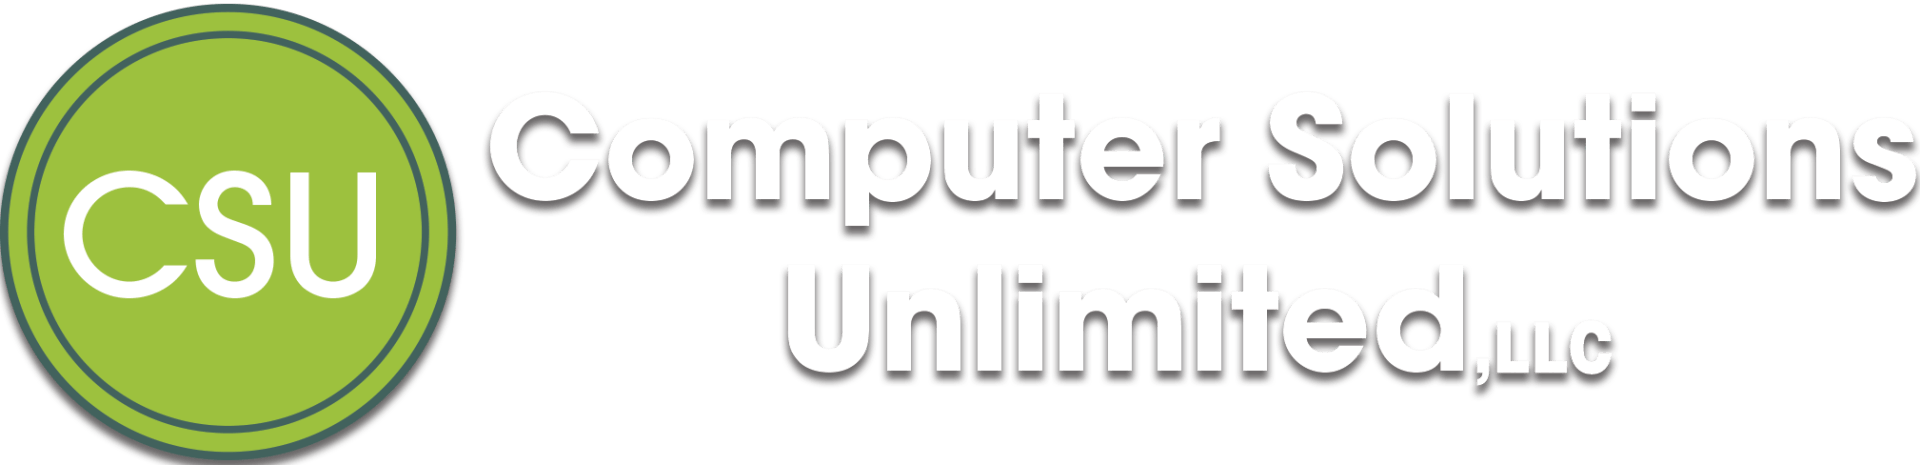 Computer Solutions Unlimited, LLC in Ponca City, OK